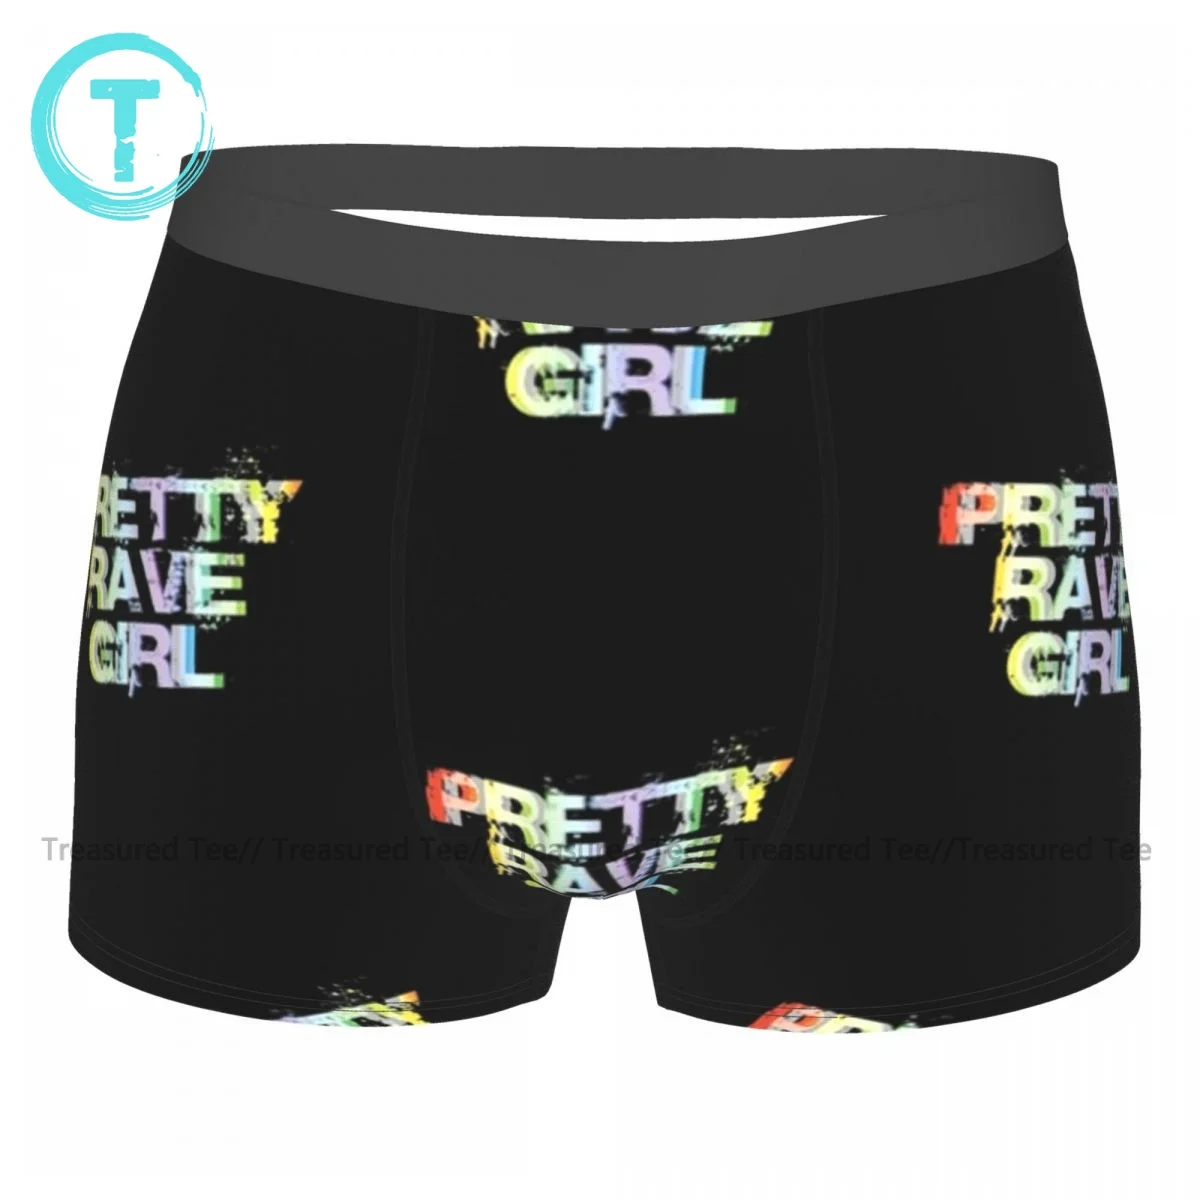 Rave Underwear Print Polyester Sublimation Trunk Hot Male Cute Boxer Brief